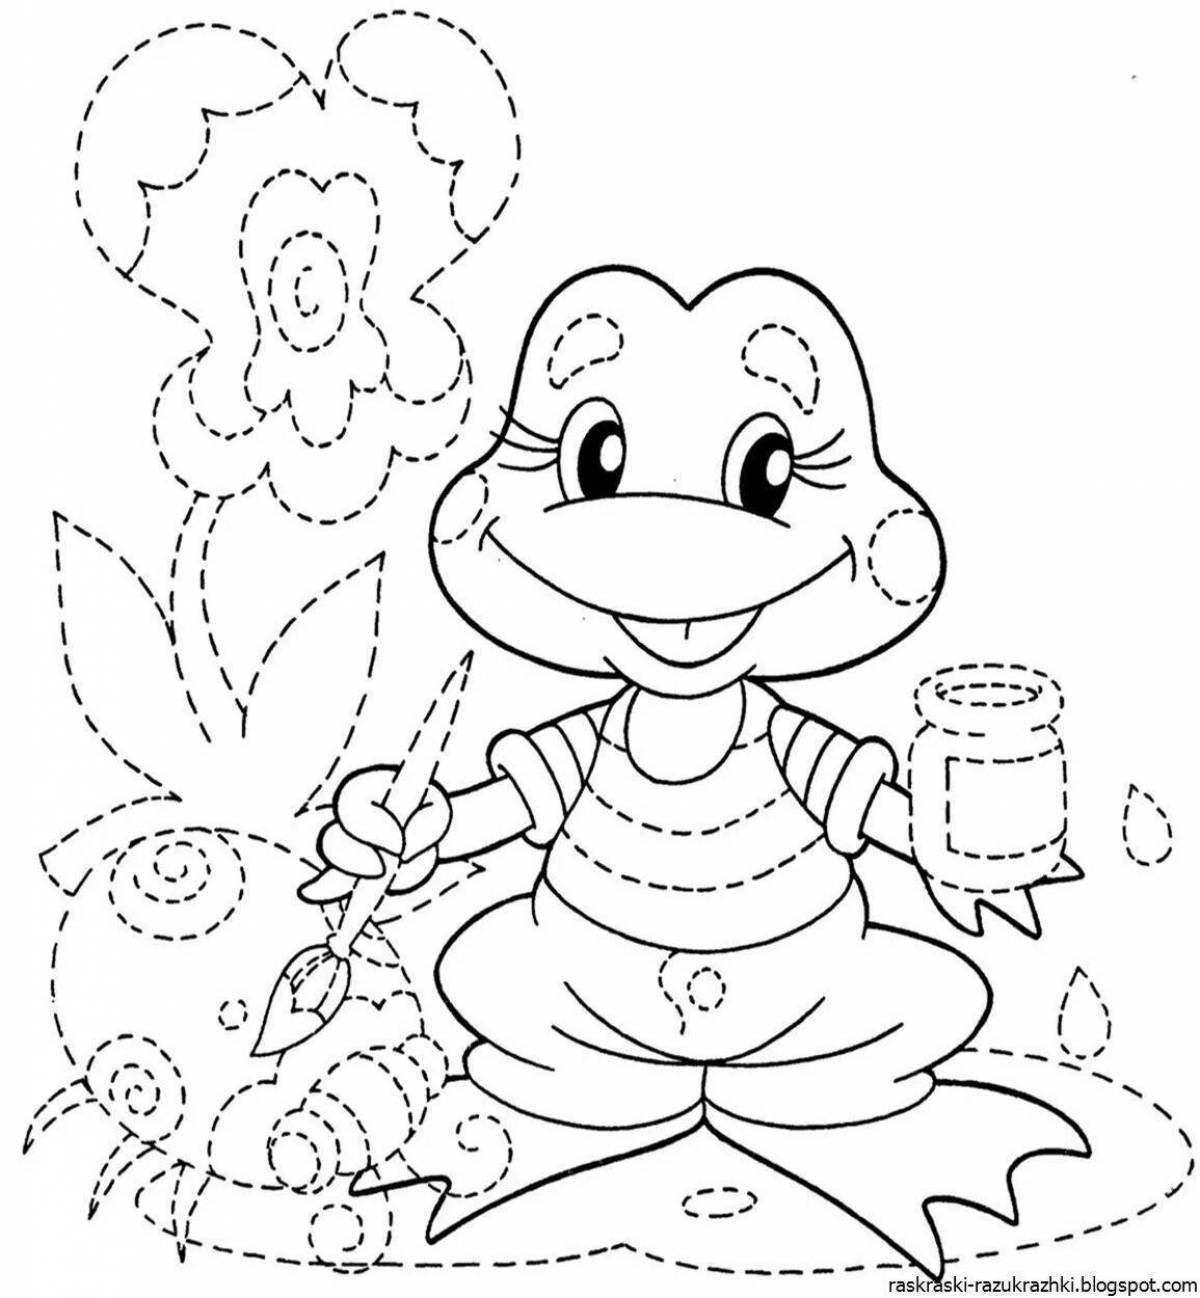 Adorable coloring book for kids pdf